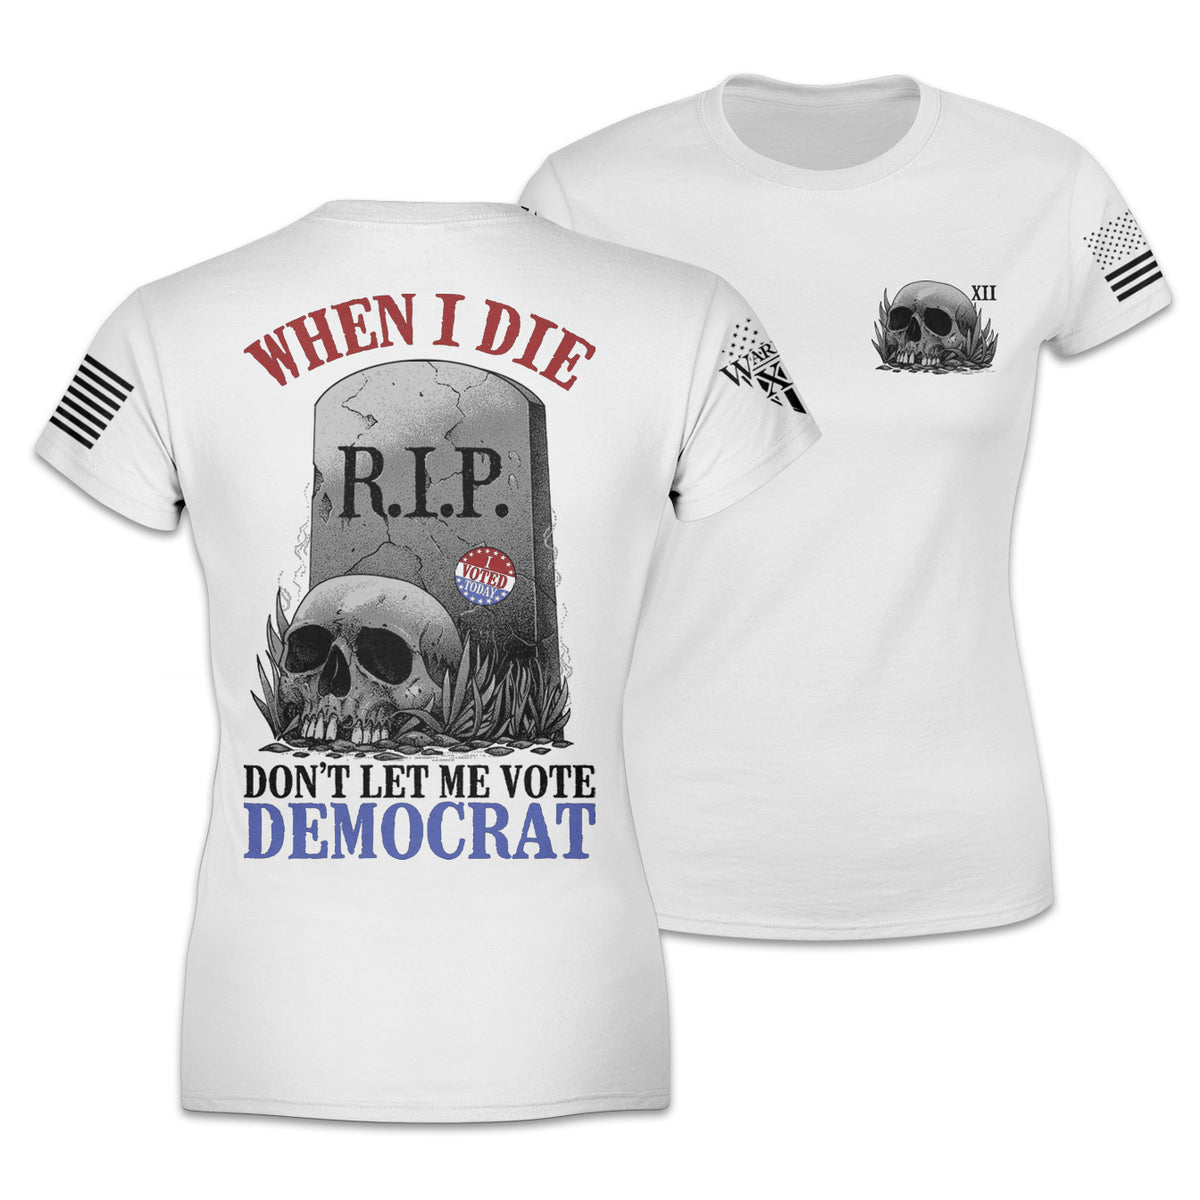 Front and back white women's relaxed t-shirt with the words "When I die, don't let me vote Democrat" with a gravestone and a skull printed on the shirt.